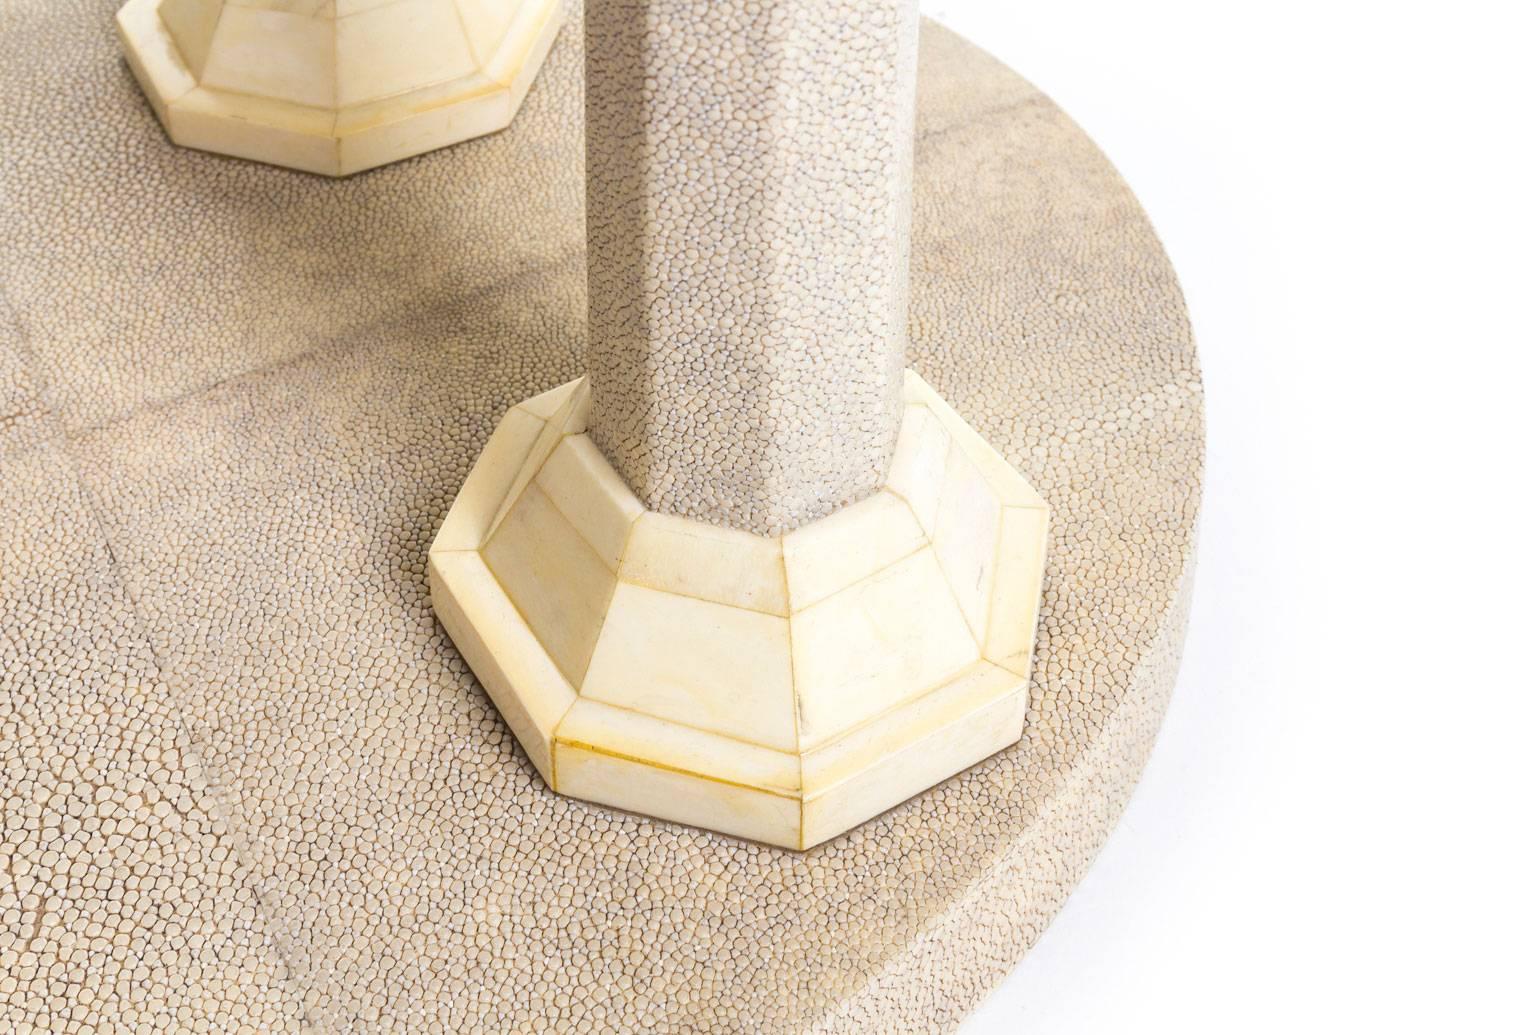 A very fine shagreen and bone stool replica in the style of Jules Leleu (1883-1961). This model was designed in 1925 and reflects the elegance of the period it was made in.